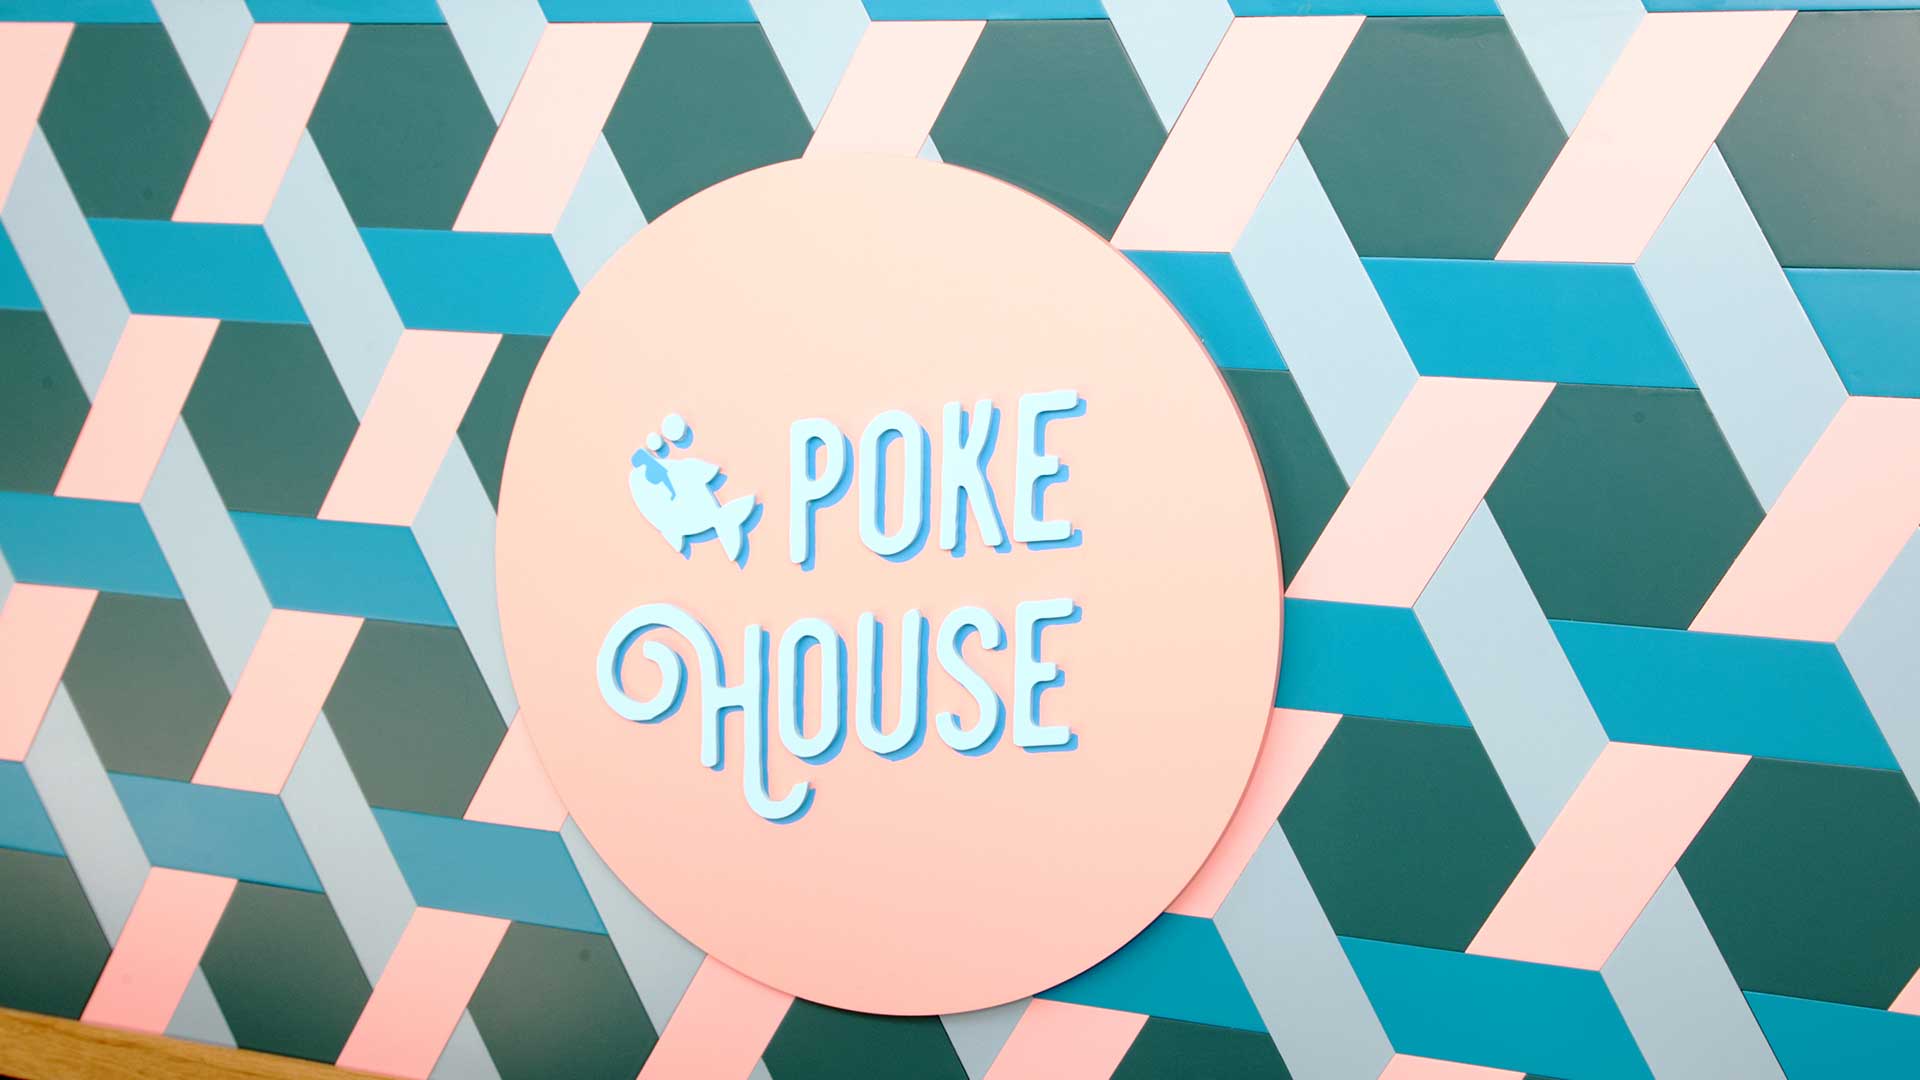 Implementation of the Poke House restaurant in Valencia